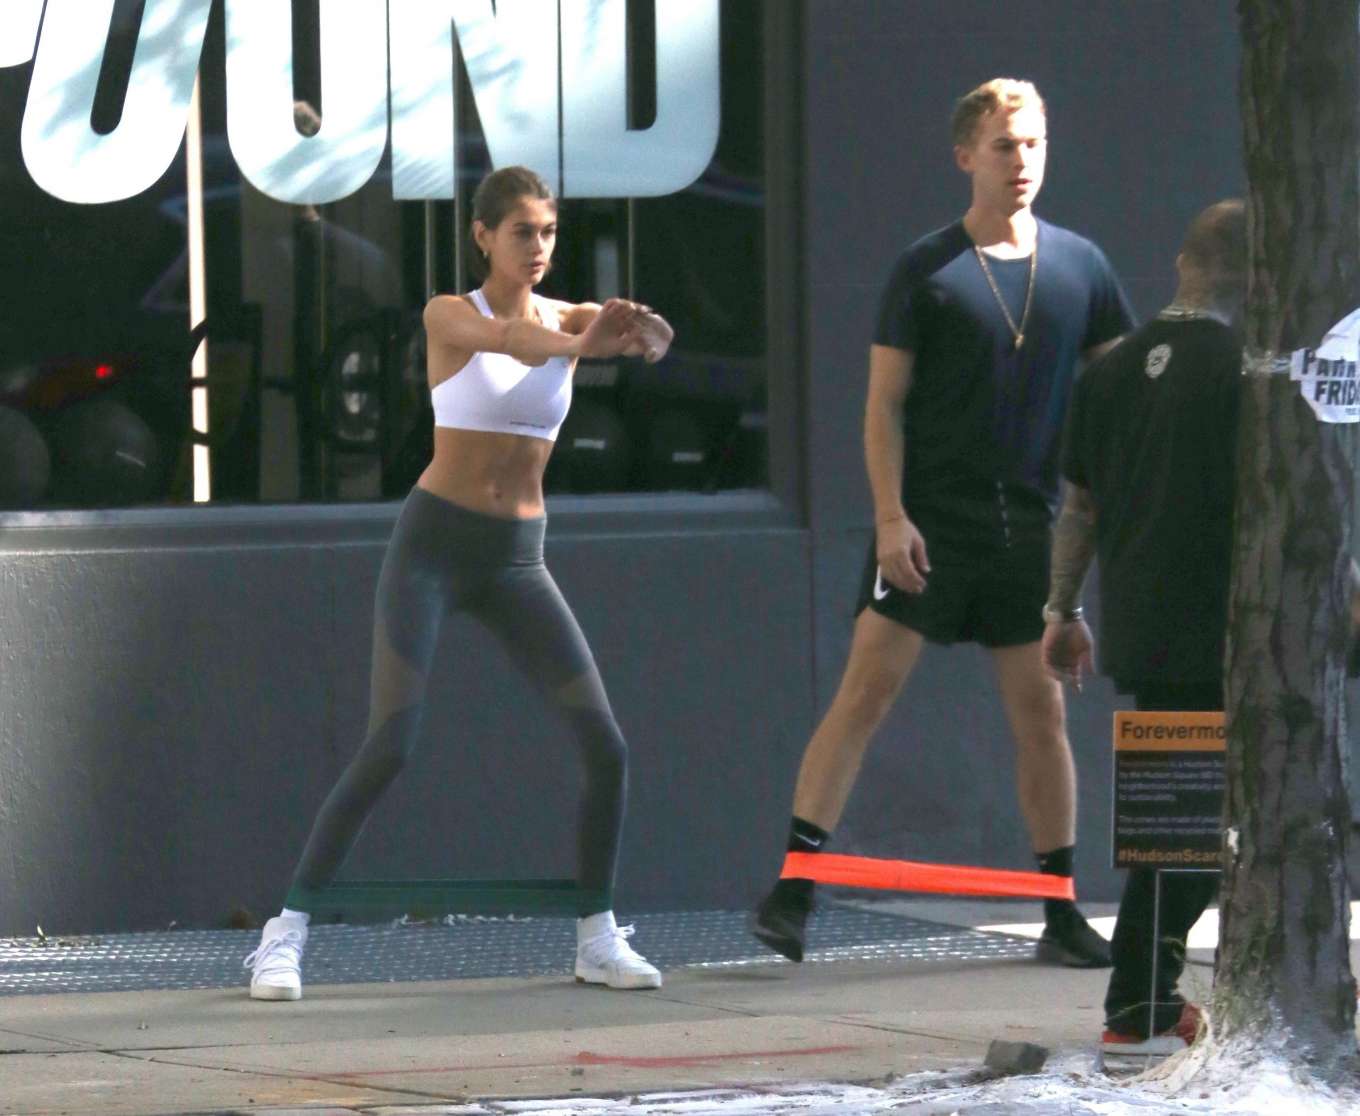 30 Minute Kaia gerber diet workout for Fat Body